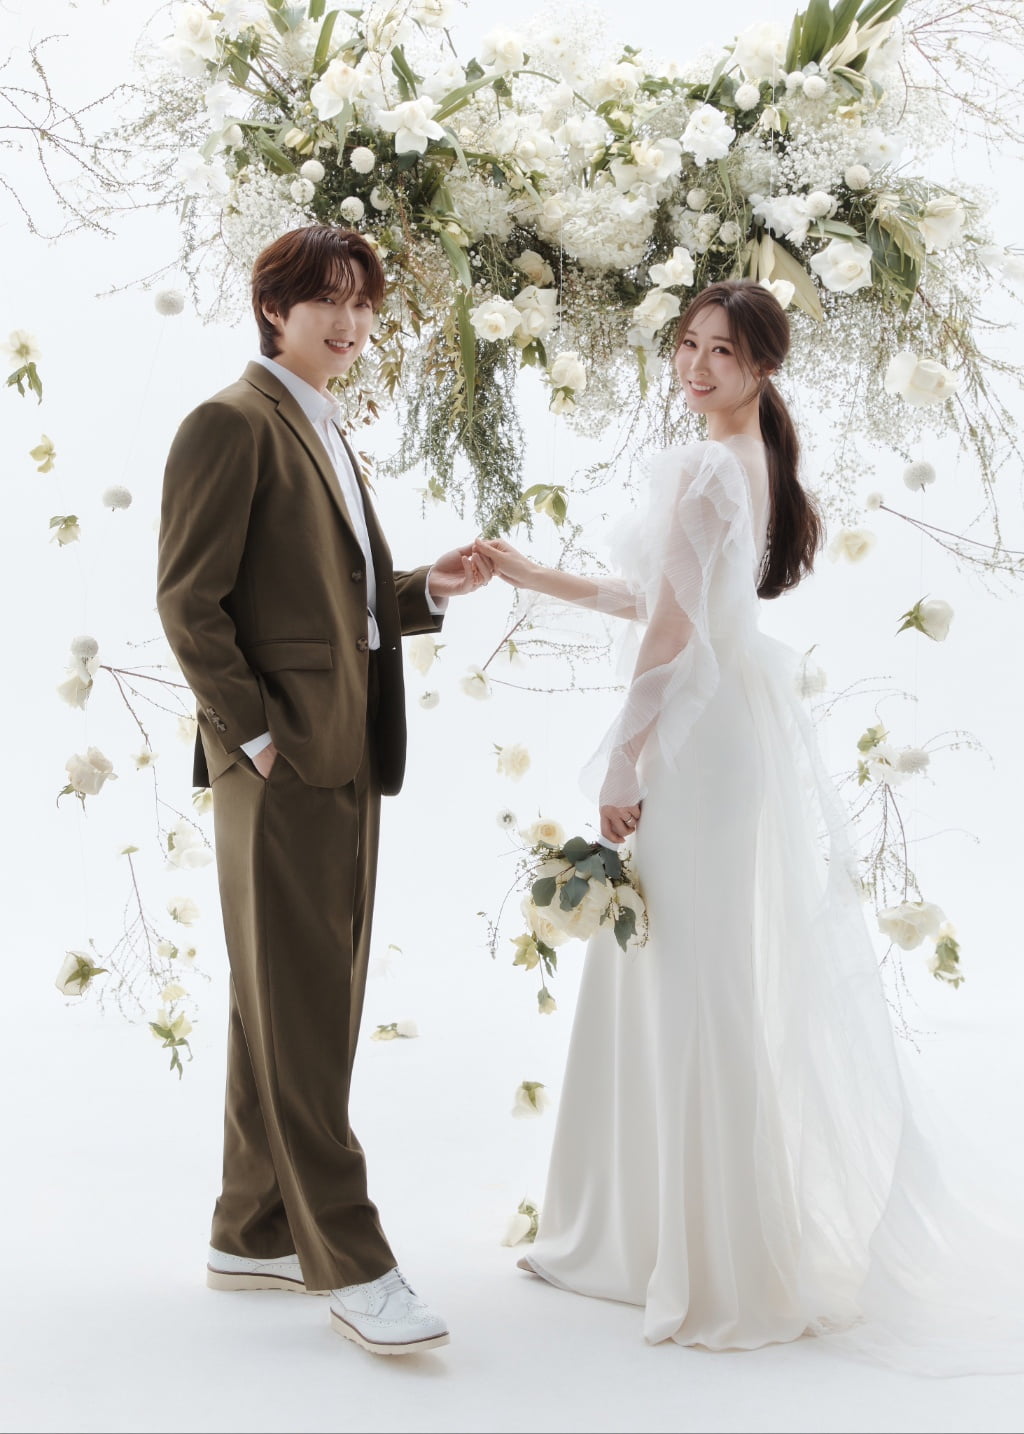 Forestella’s Kang Hyung Ho To Tie The Knot With Weathercaster Jung Min Kyung